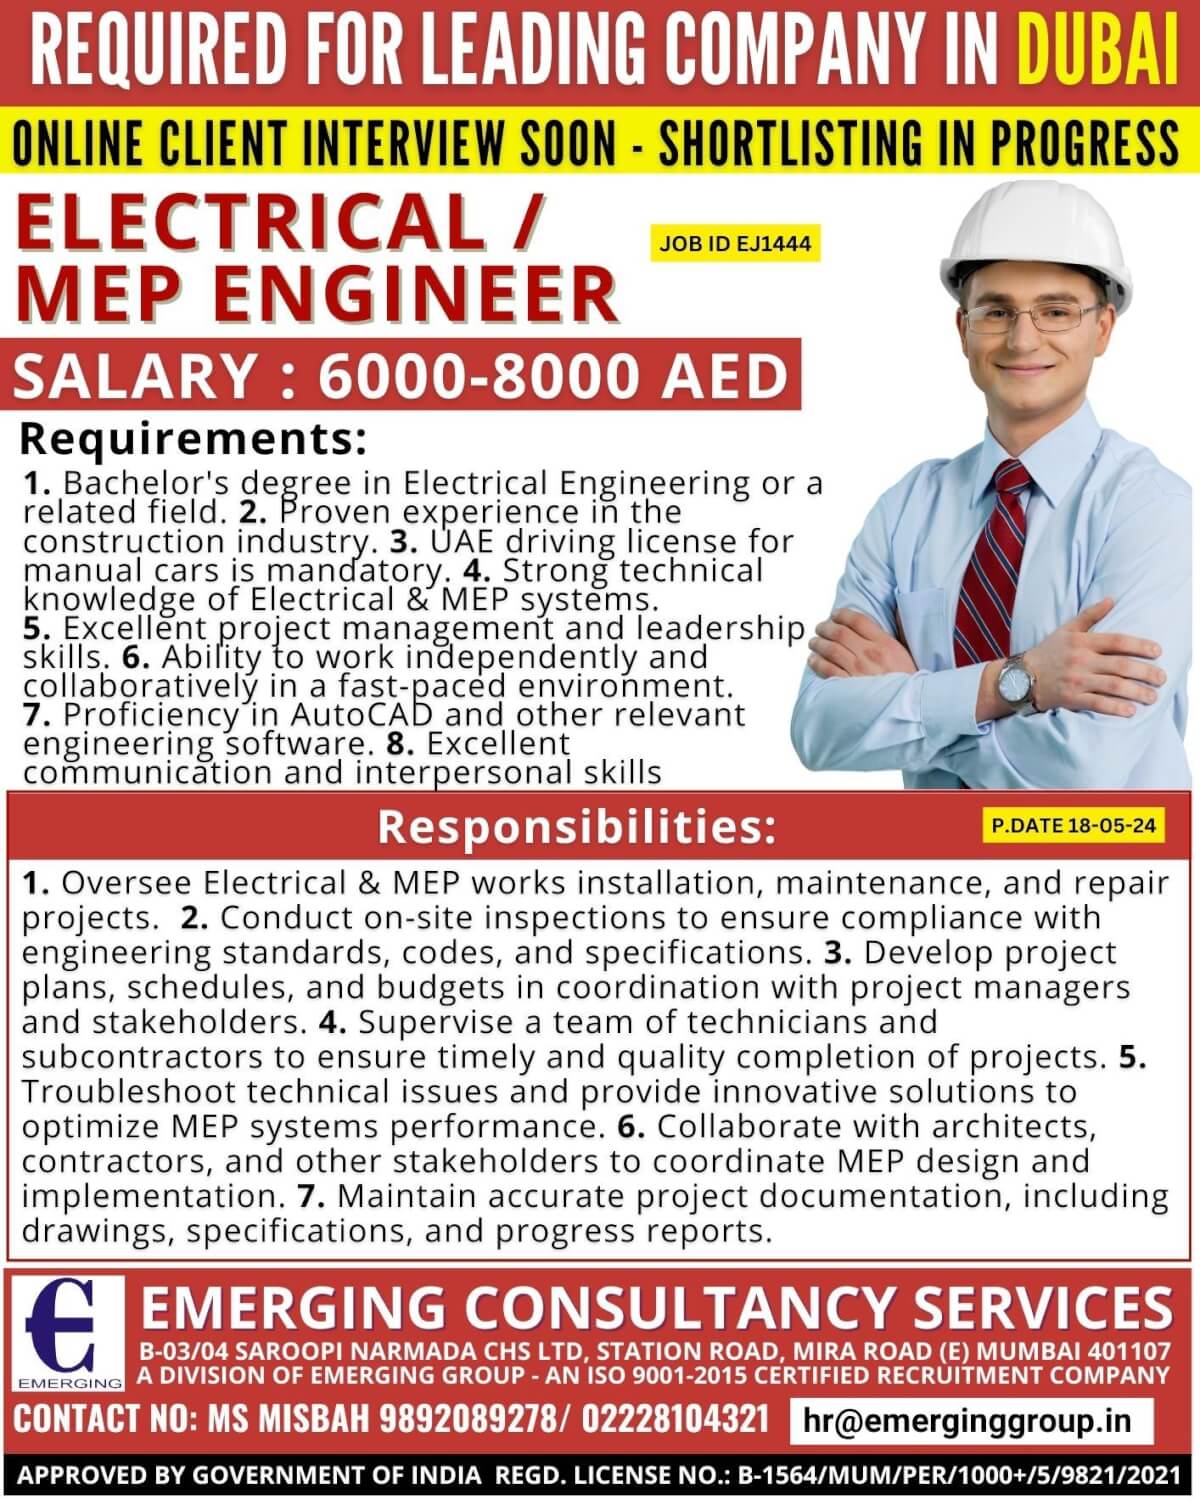 REQUIRED FOR LEADING COMPANY IN DUBAI - SHORTLISTING IN PROGRESS